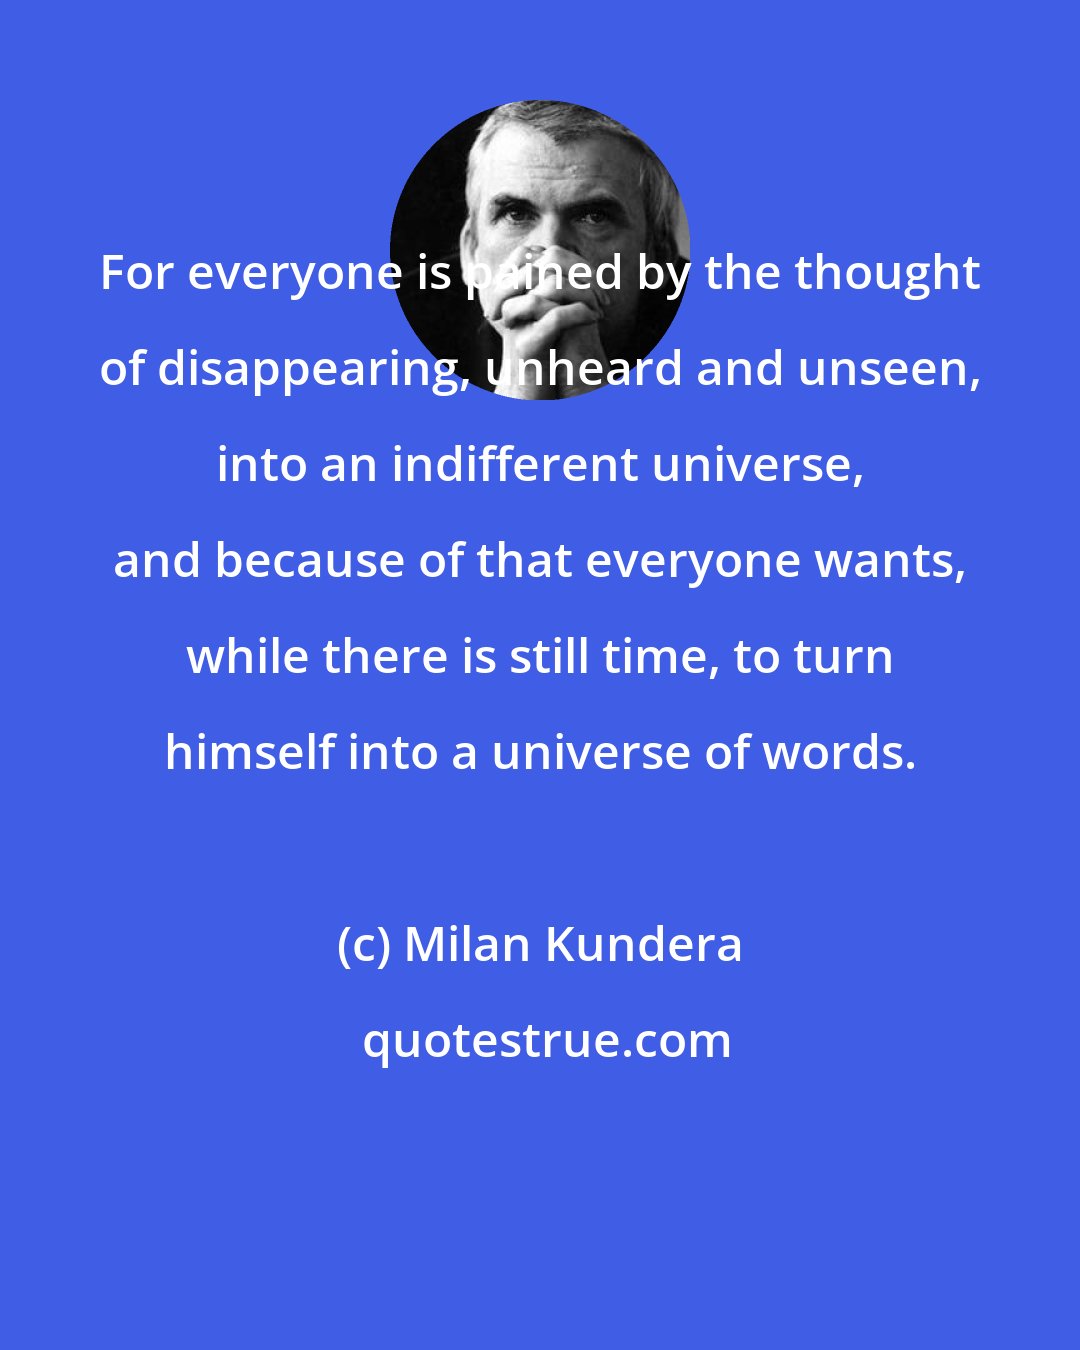 Milan Kundera: For everyone is pained by the thought of disappearing, unheard and unseen, into an indifferent universe, and because of that everyone wants, while there is still time, to turn himself into a universe of words.